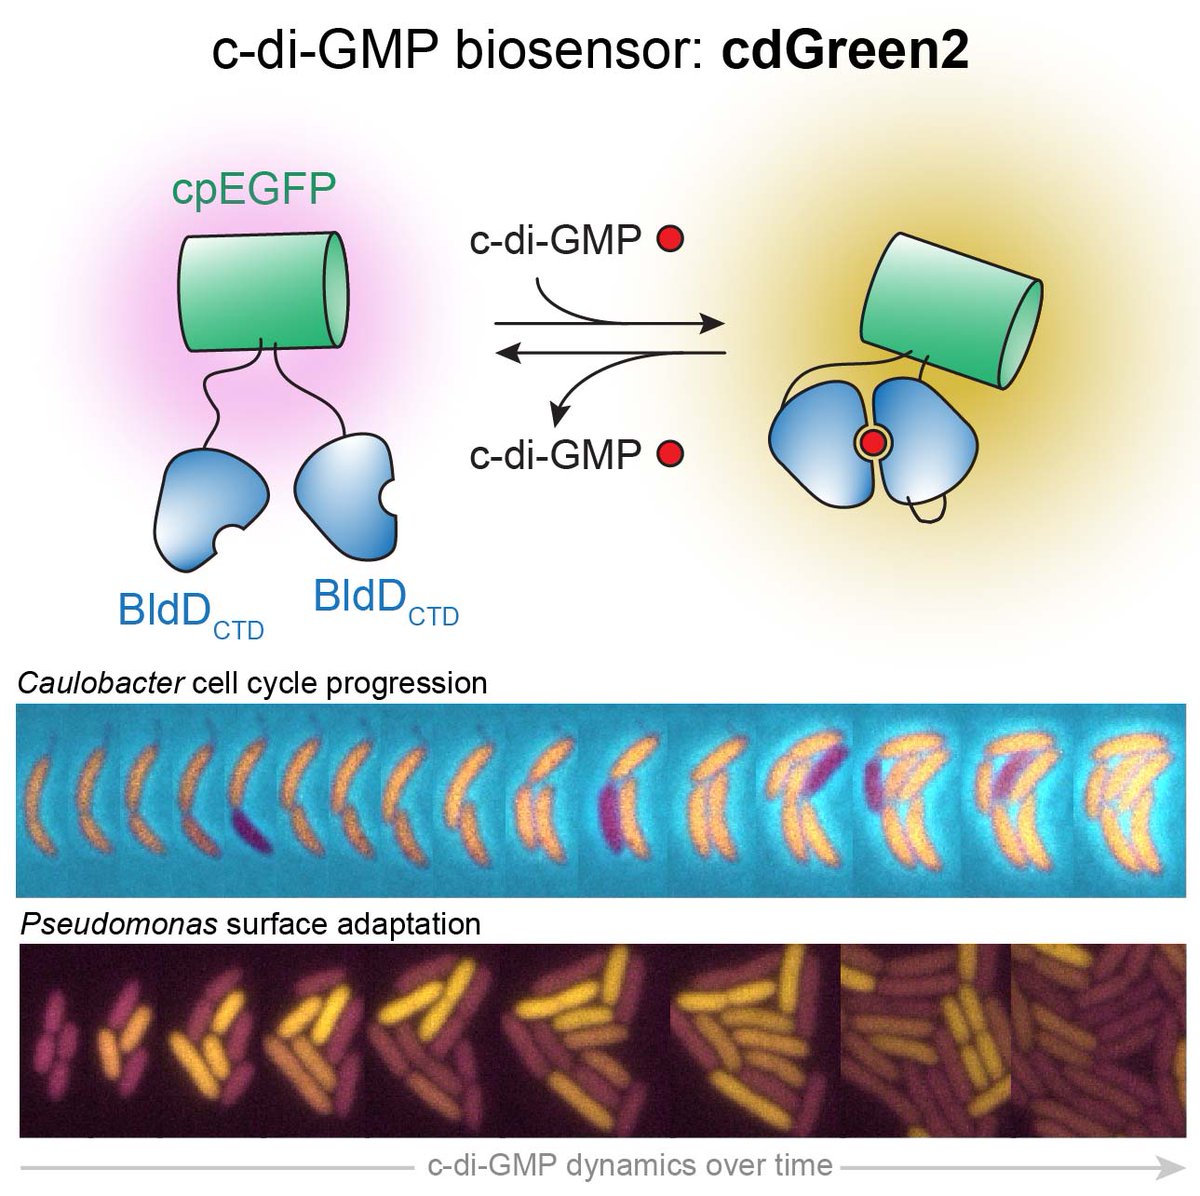 Our c-di-GMP sensor story is finally out in @NatureComms: rdcu.be/dHsEh. Including new data demonstrating cdGreen2 as a convenient tool to study DGC and PDE activity in vitro. Great collaboration with @simon_vanvliet and @MaierLab!